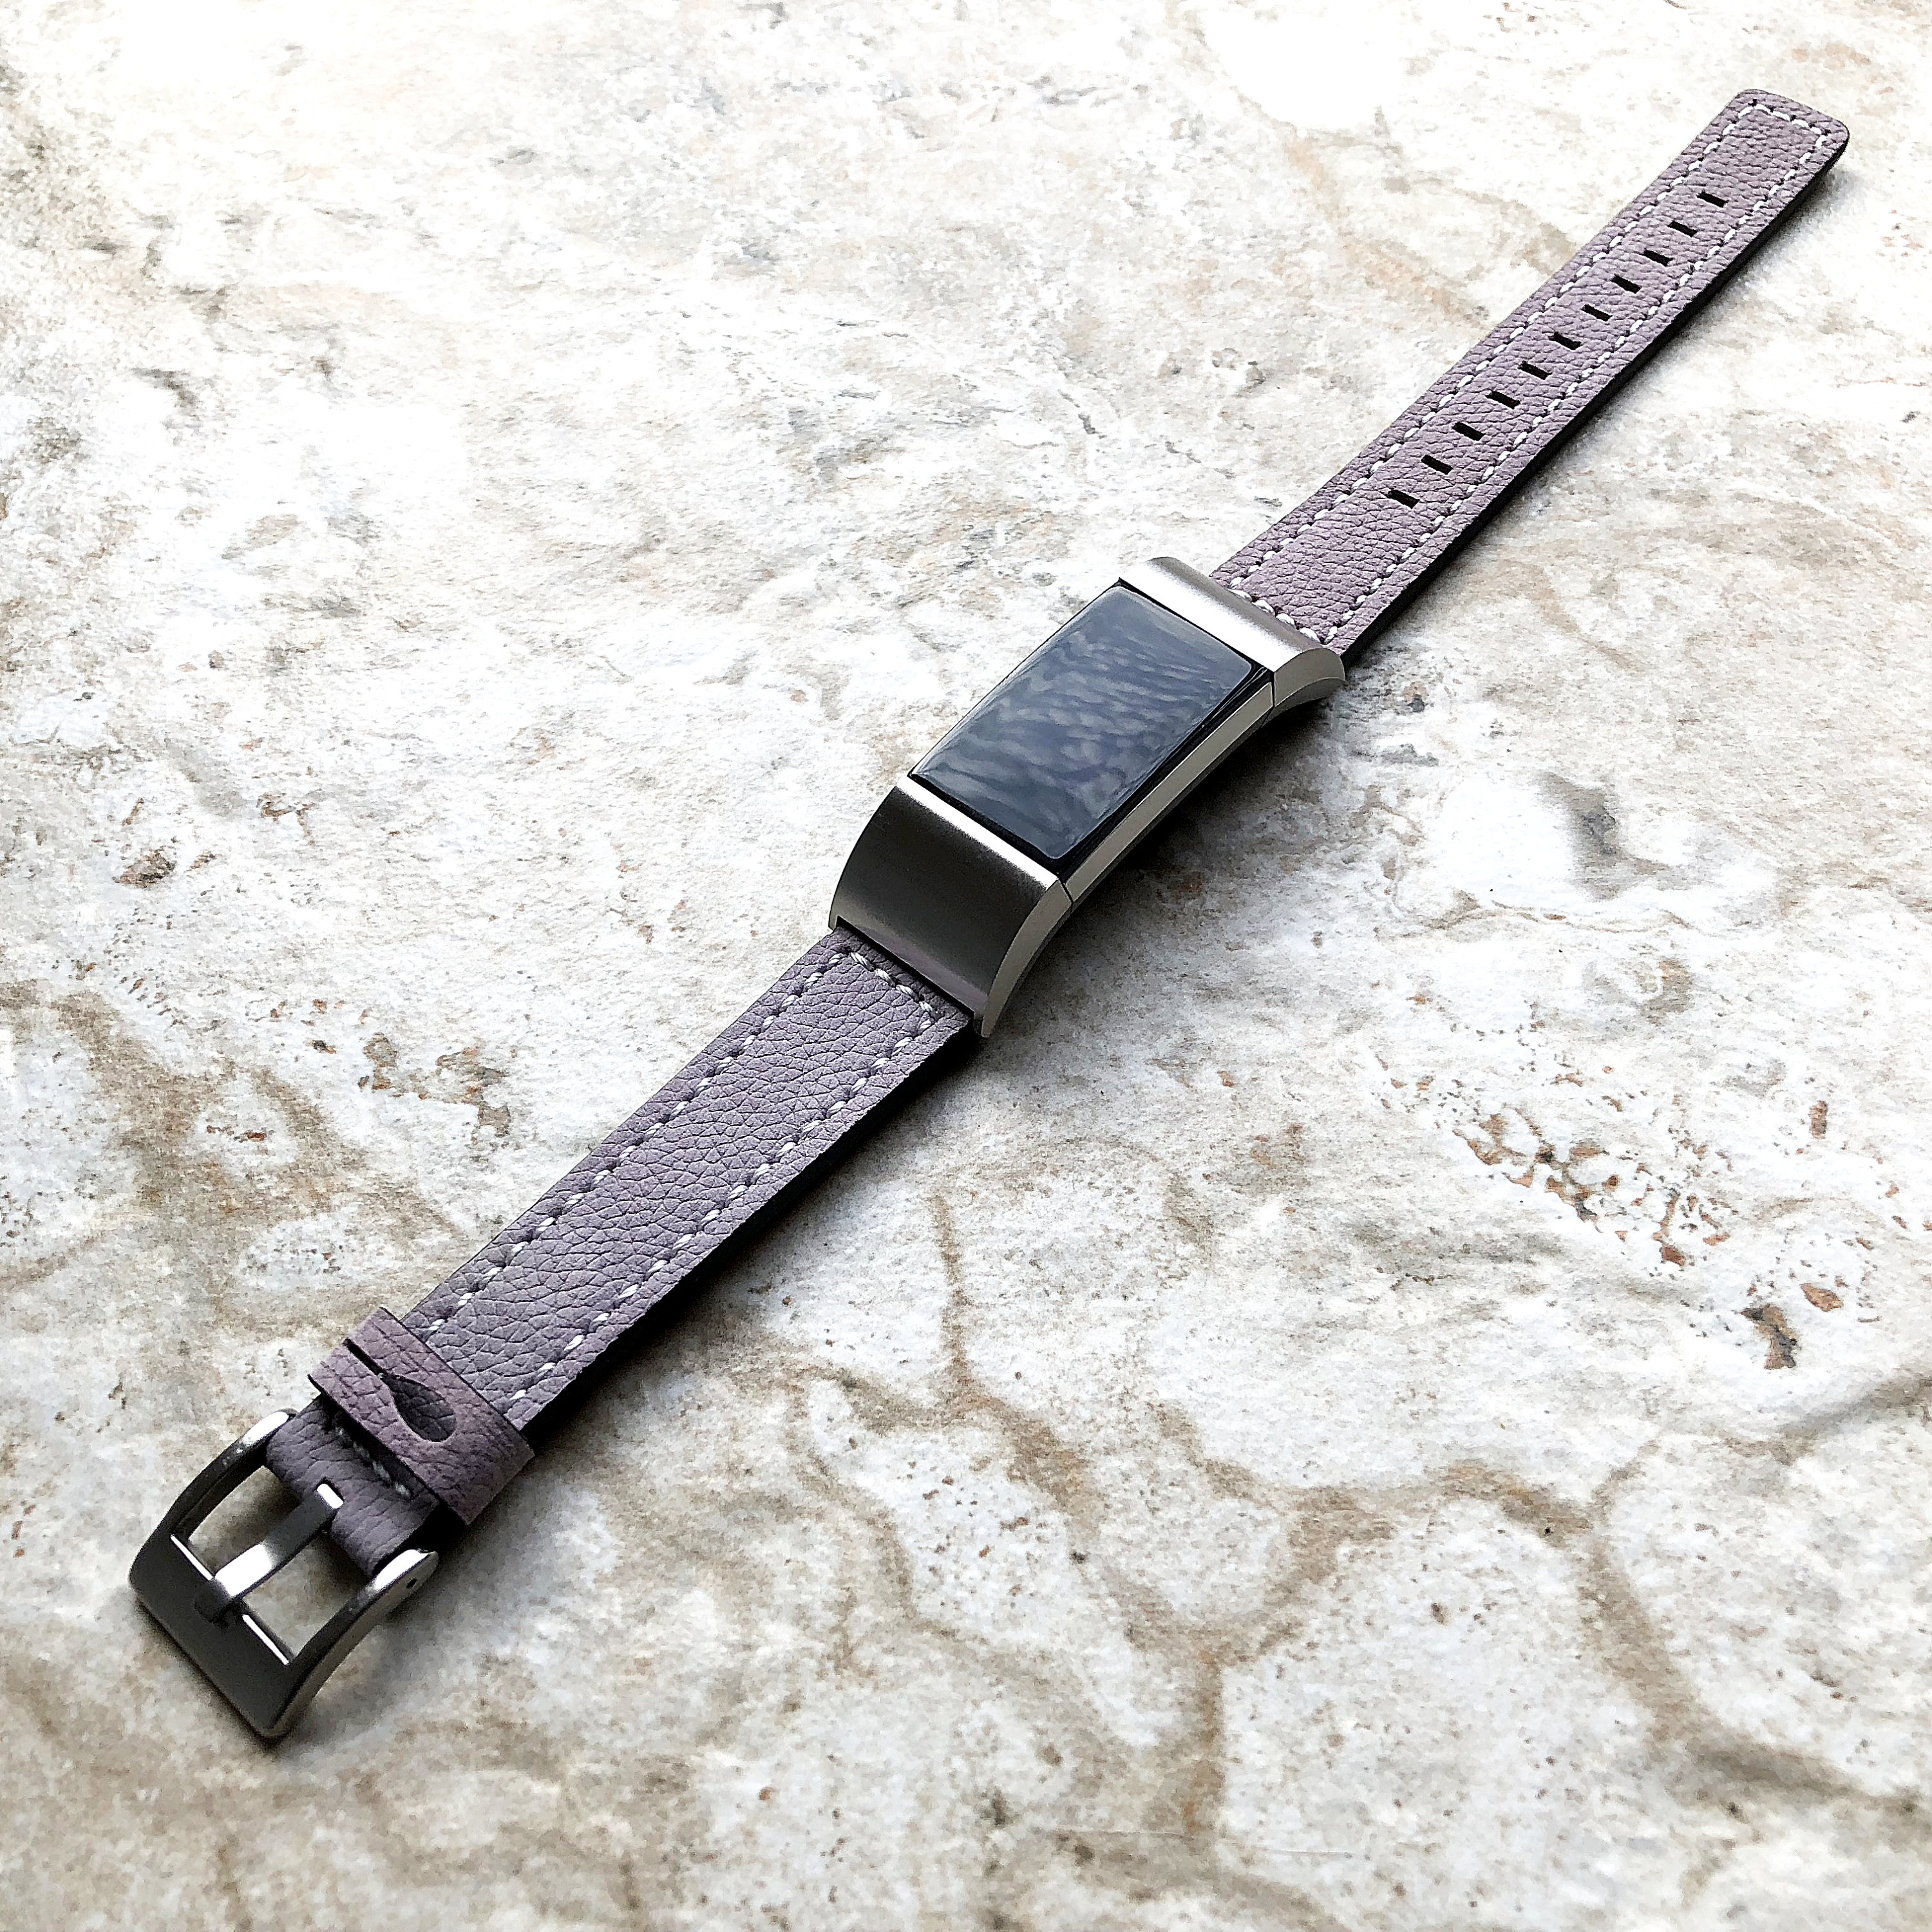 leather strap for fitbit charge 3